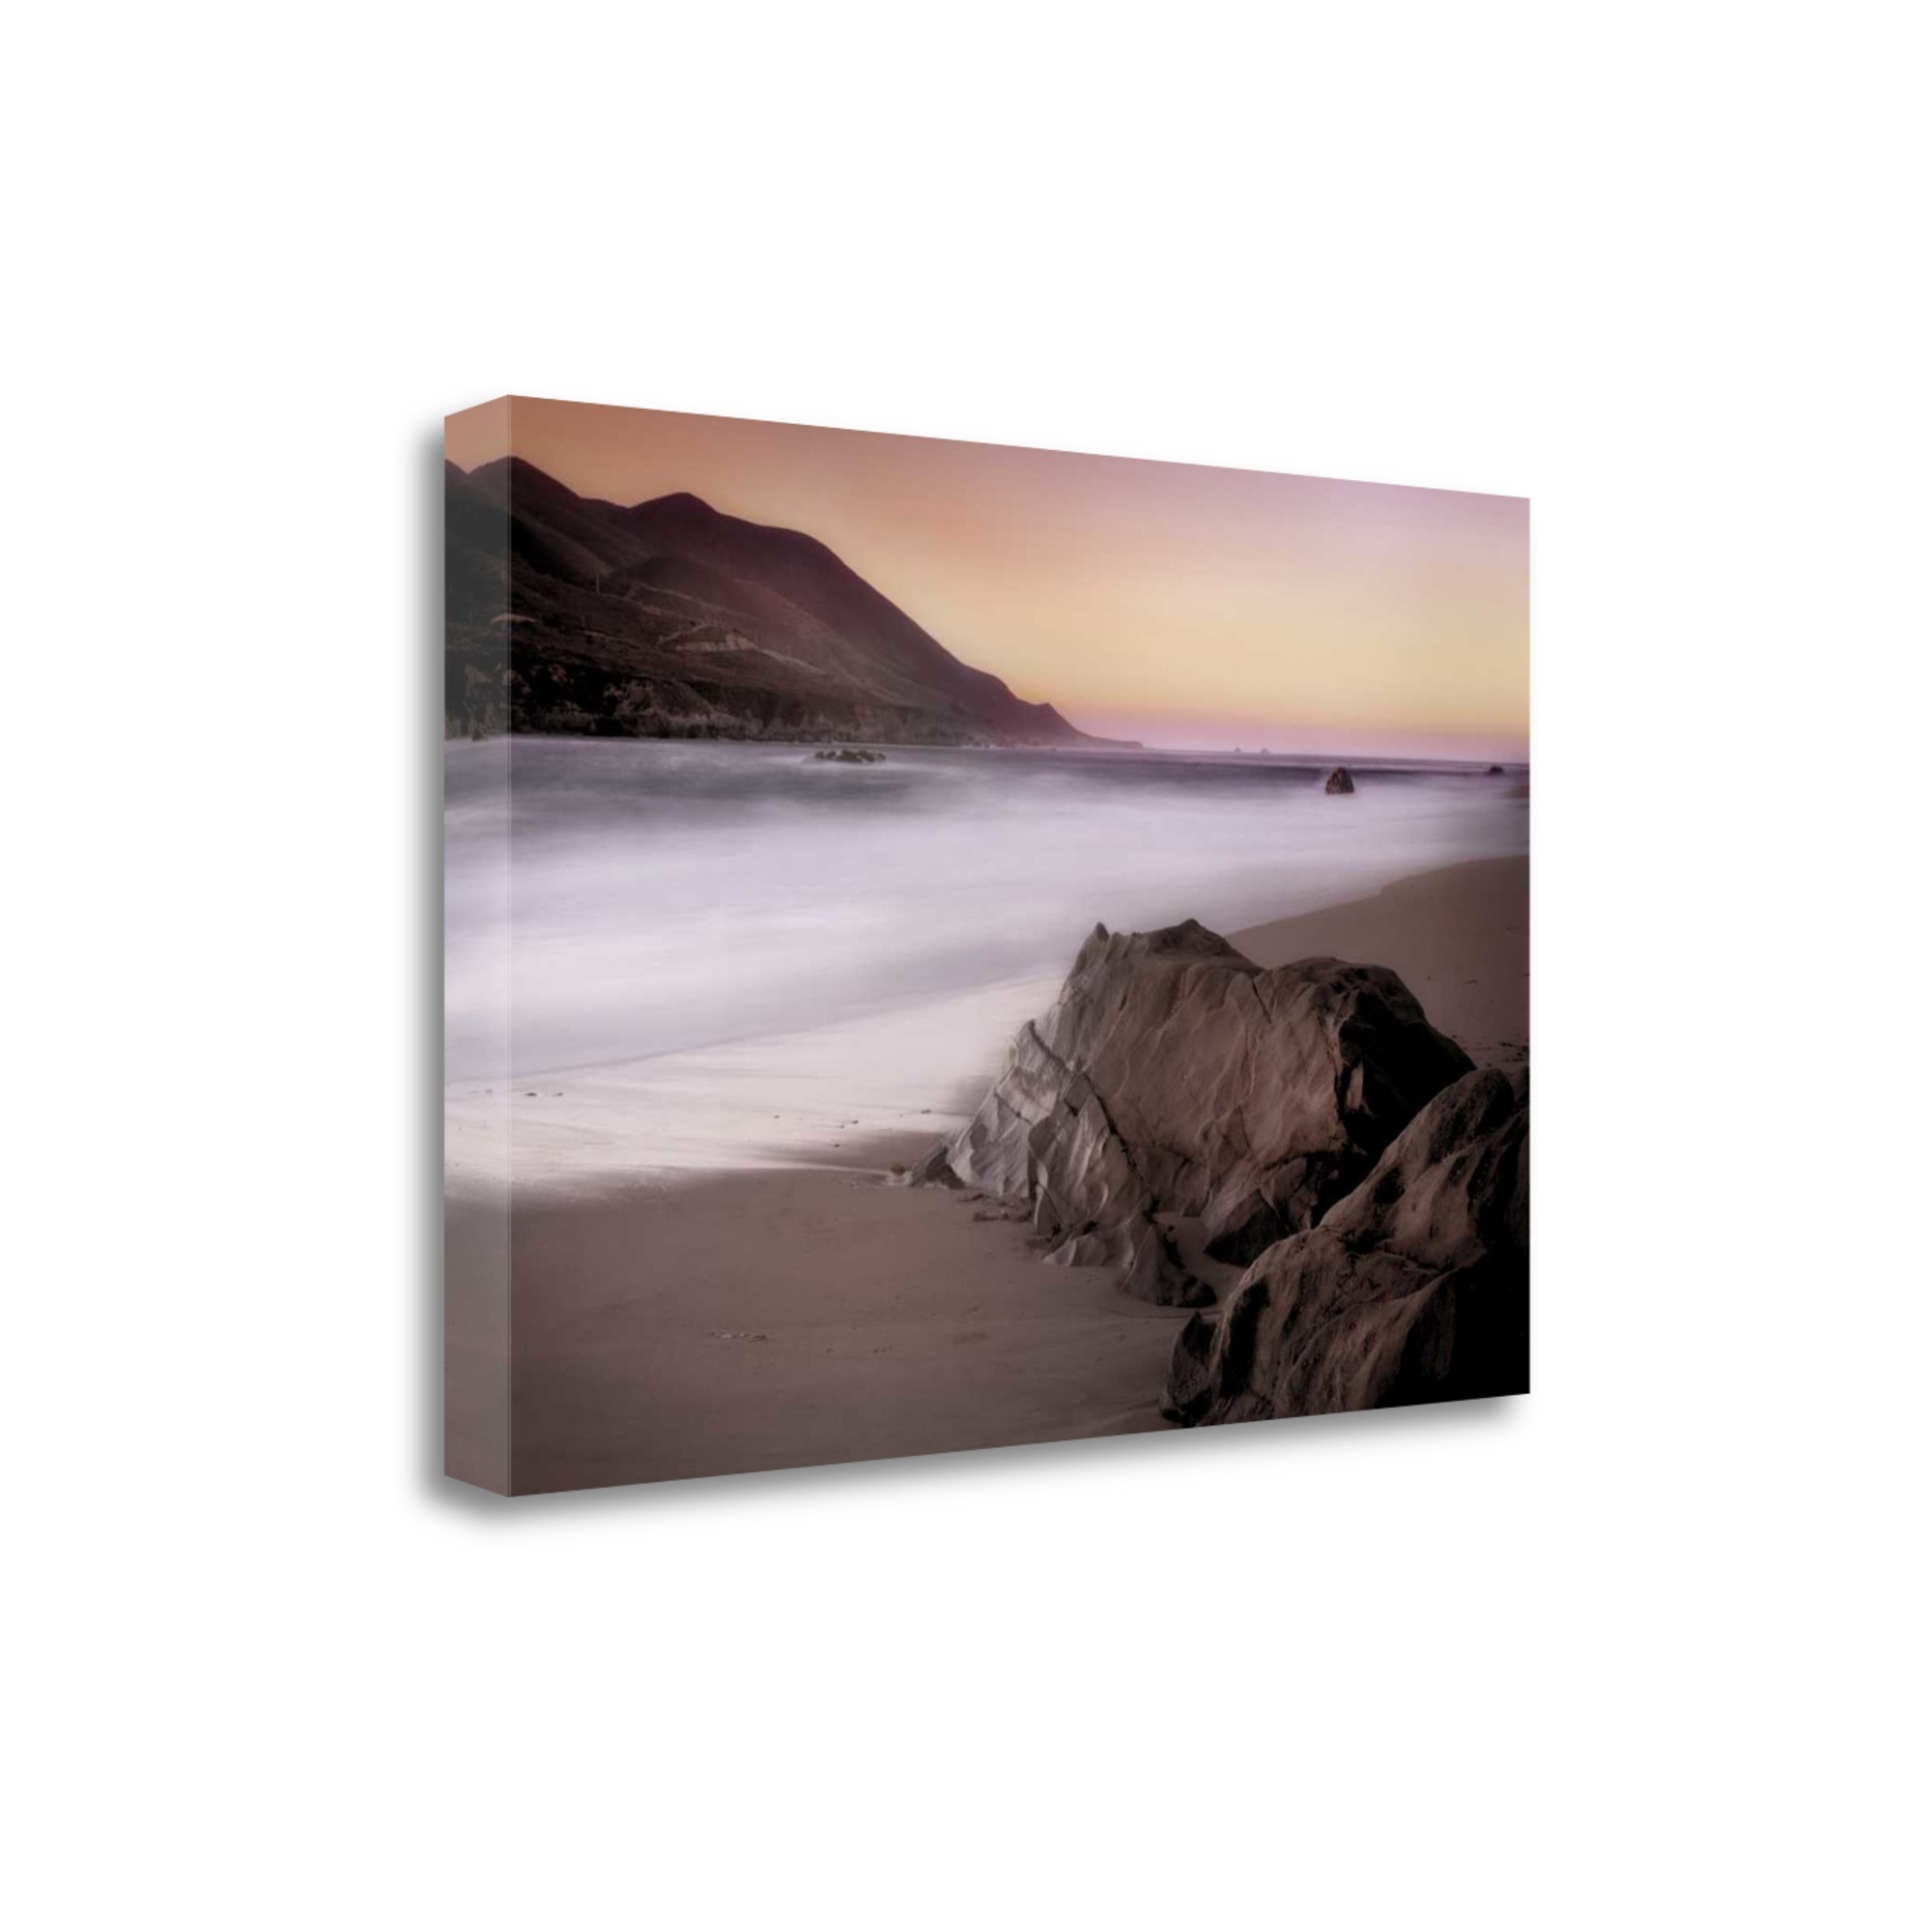 Sunset Over Mountains and Beach 5 Giclee Wrap Canvas Wall Art